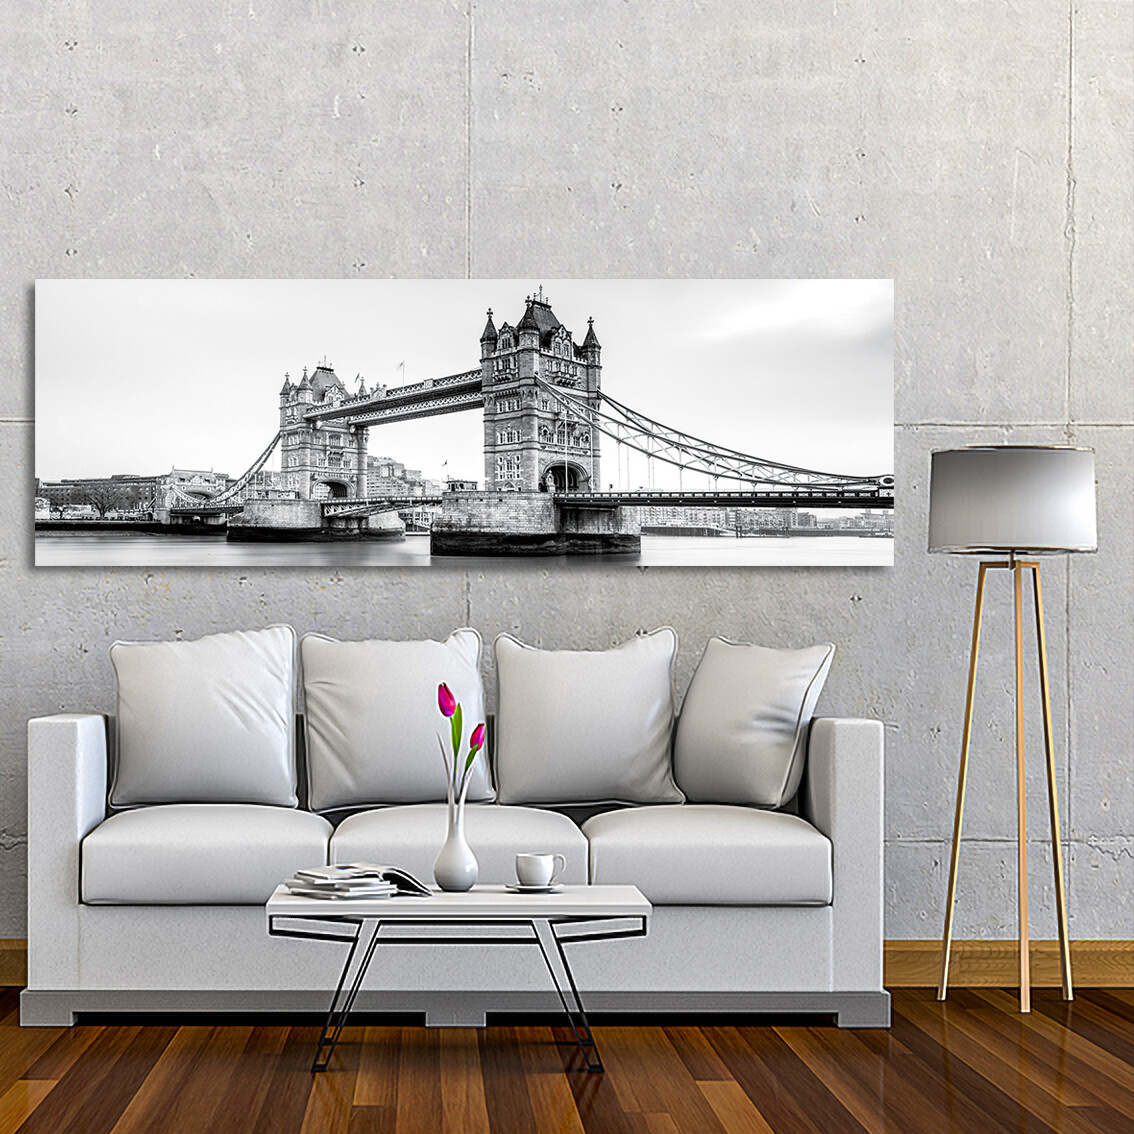 London Tower Bridge Black and white - Modern Luxury Wall art Printed on Acrylic Glass - Frameless and Ready to Hang